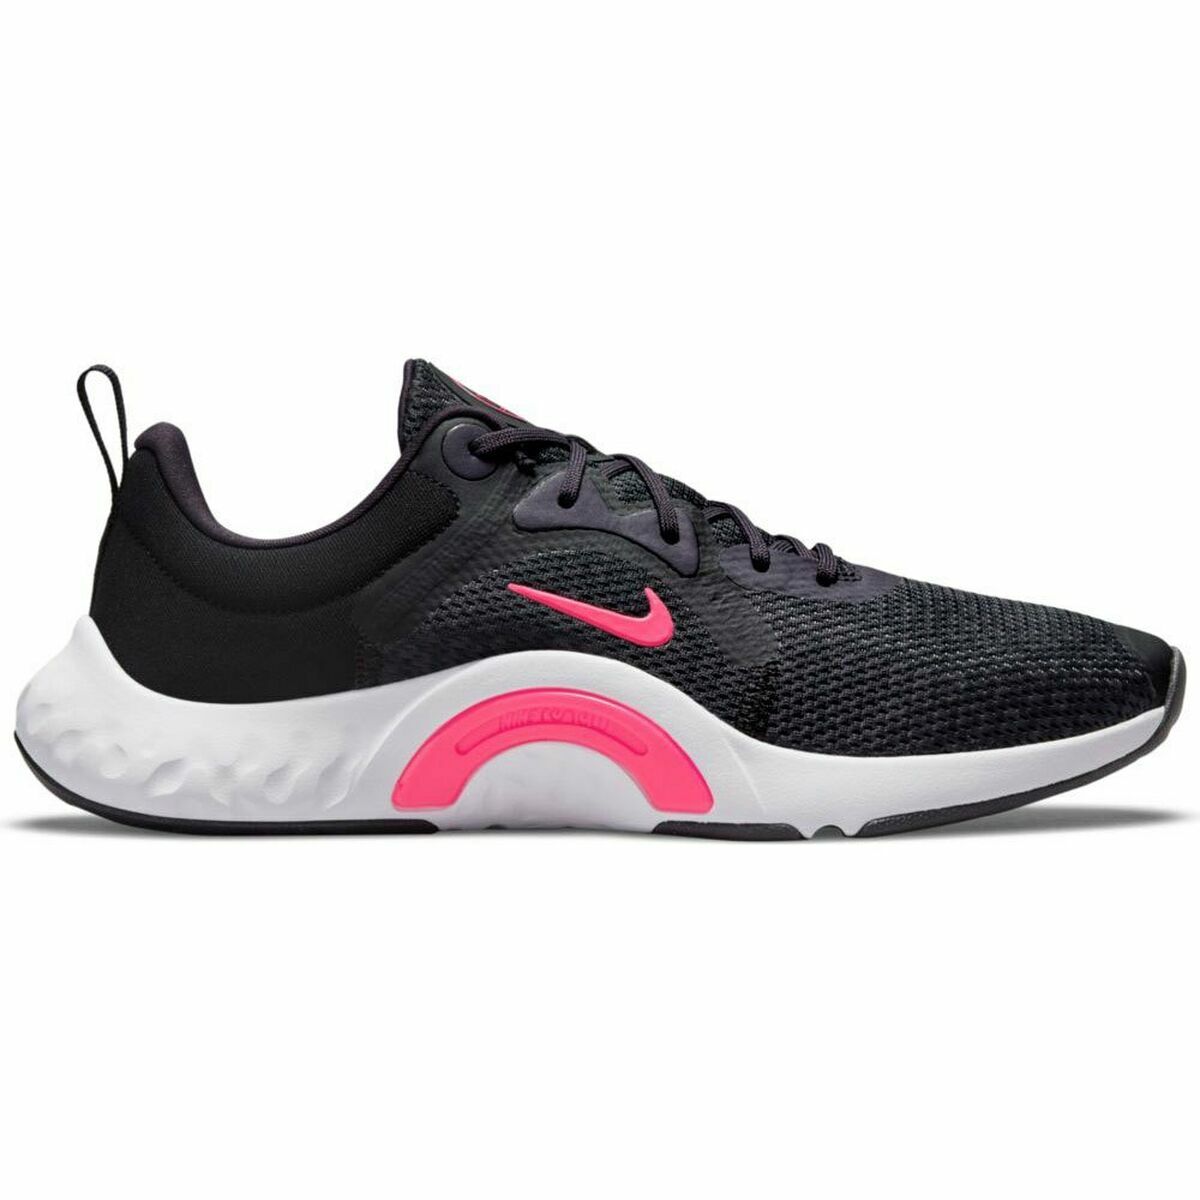 Running Shoes For Adults Nike Tr 11 Black-Nike-Urbanheer